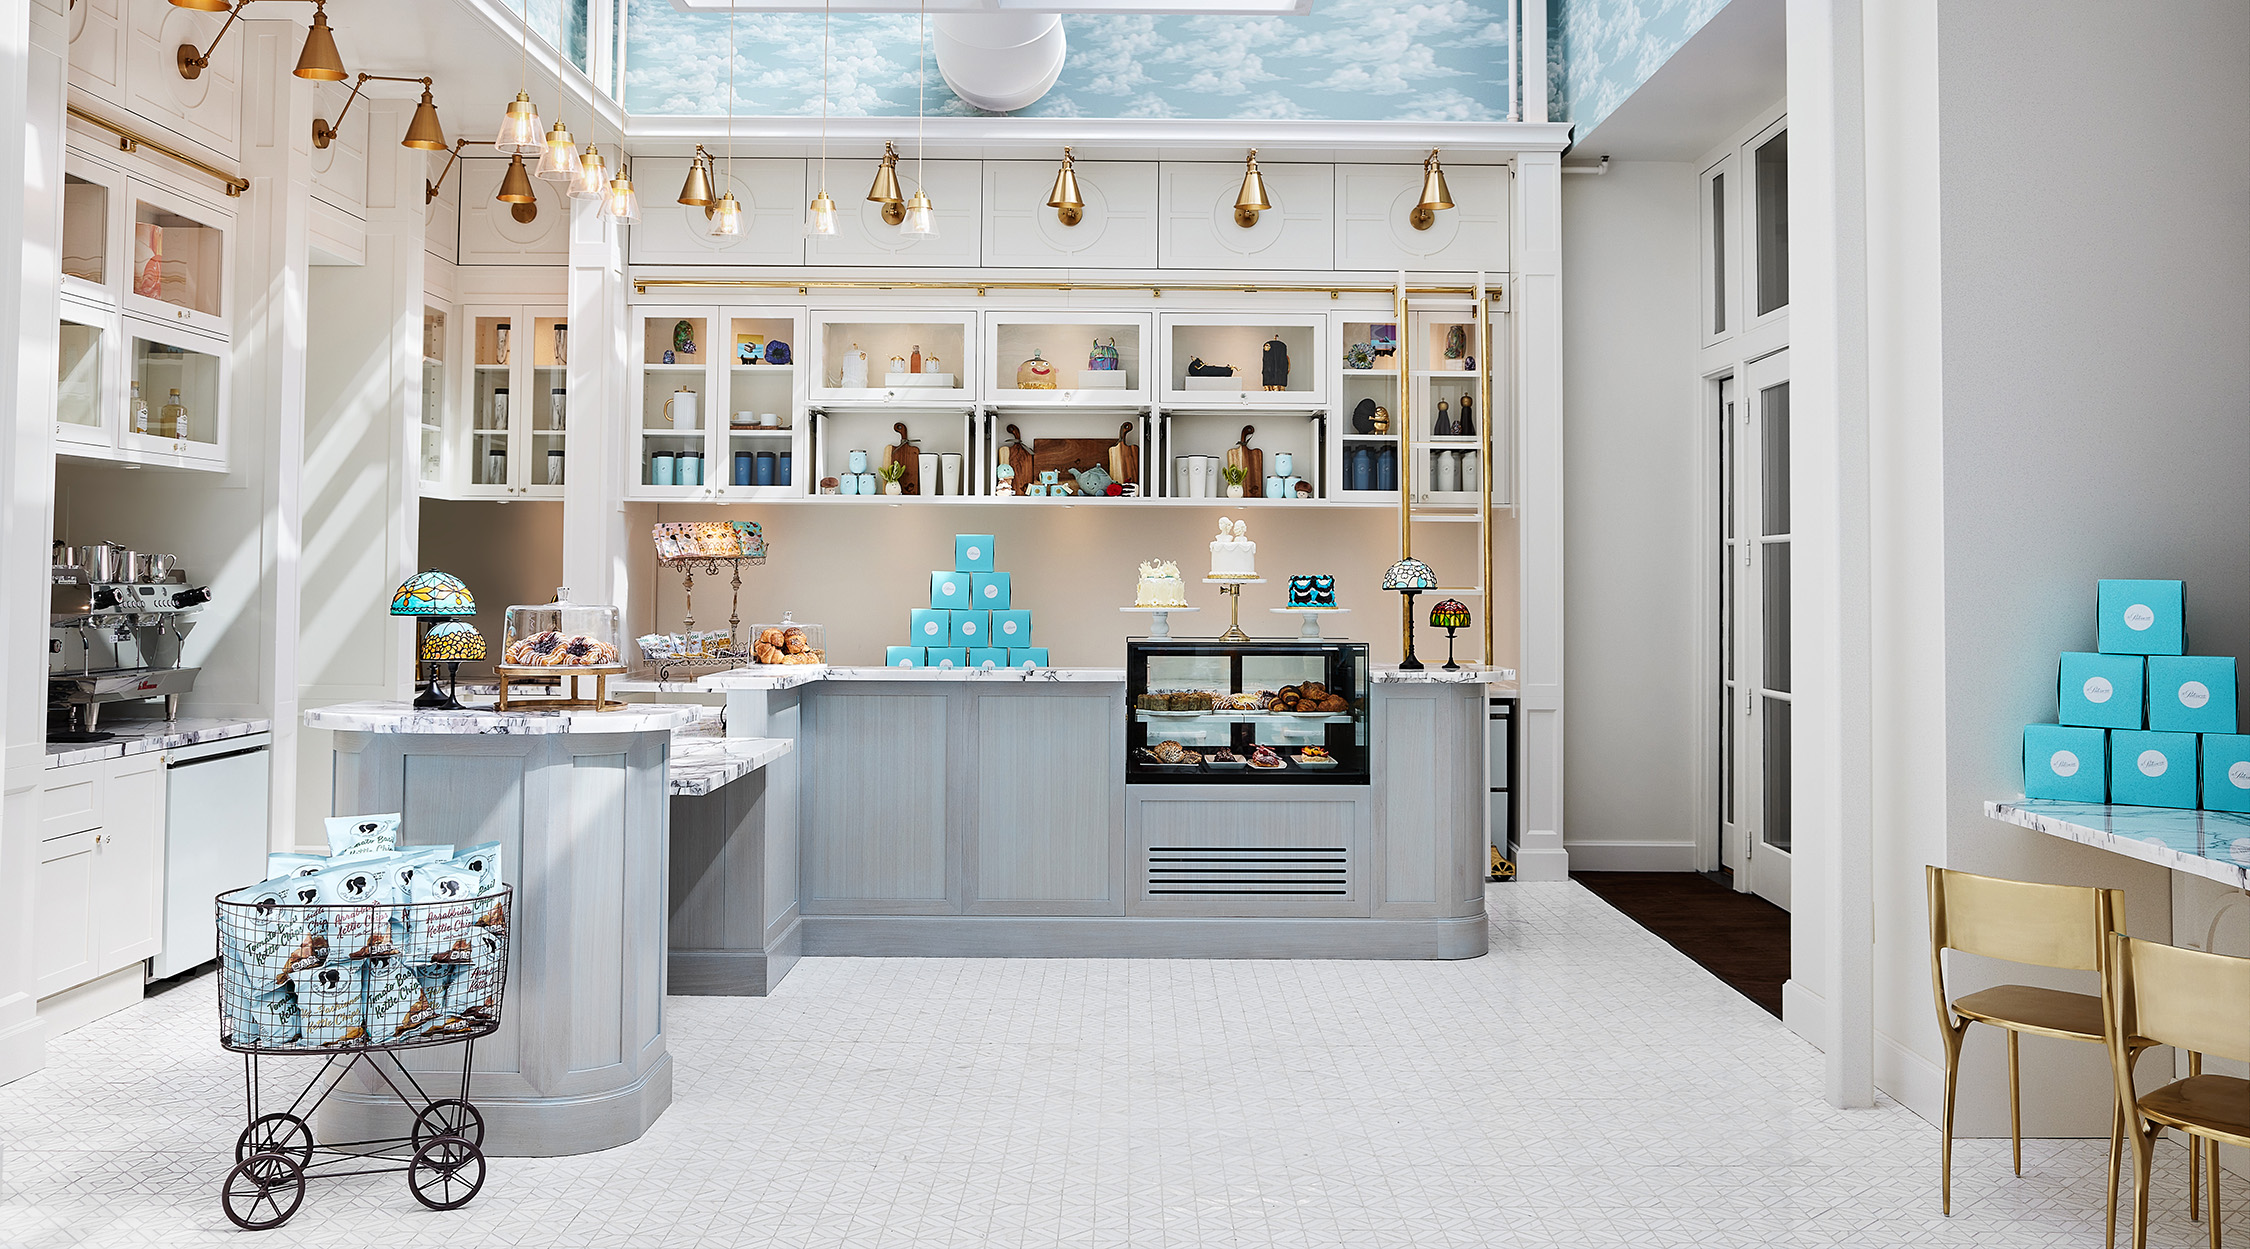 Interior photo of the counter and shelves of The Patisserie at Nemacolin resort